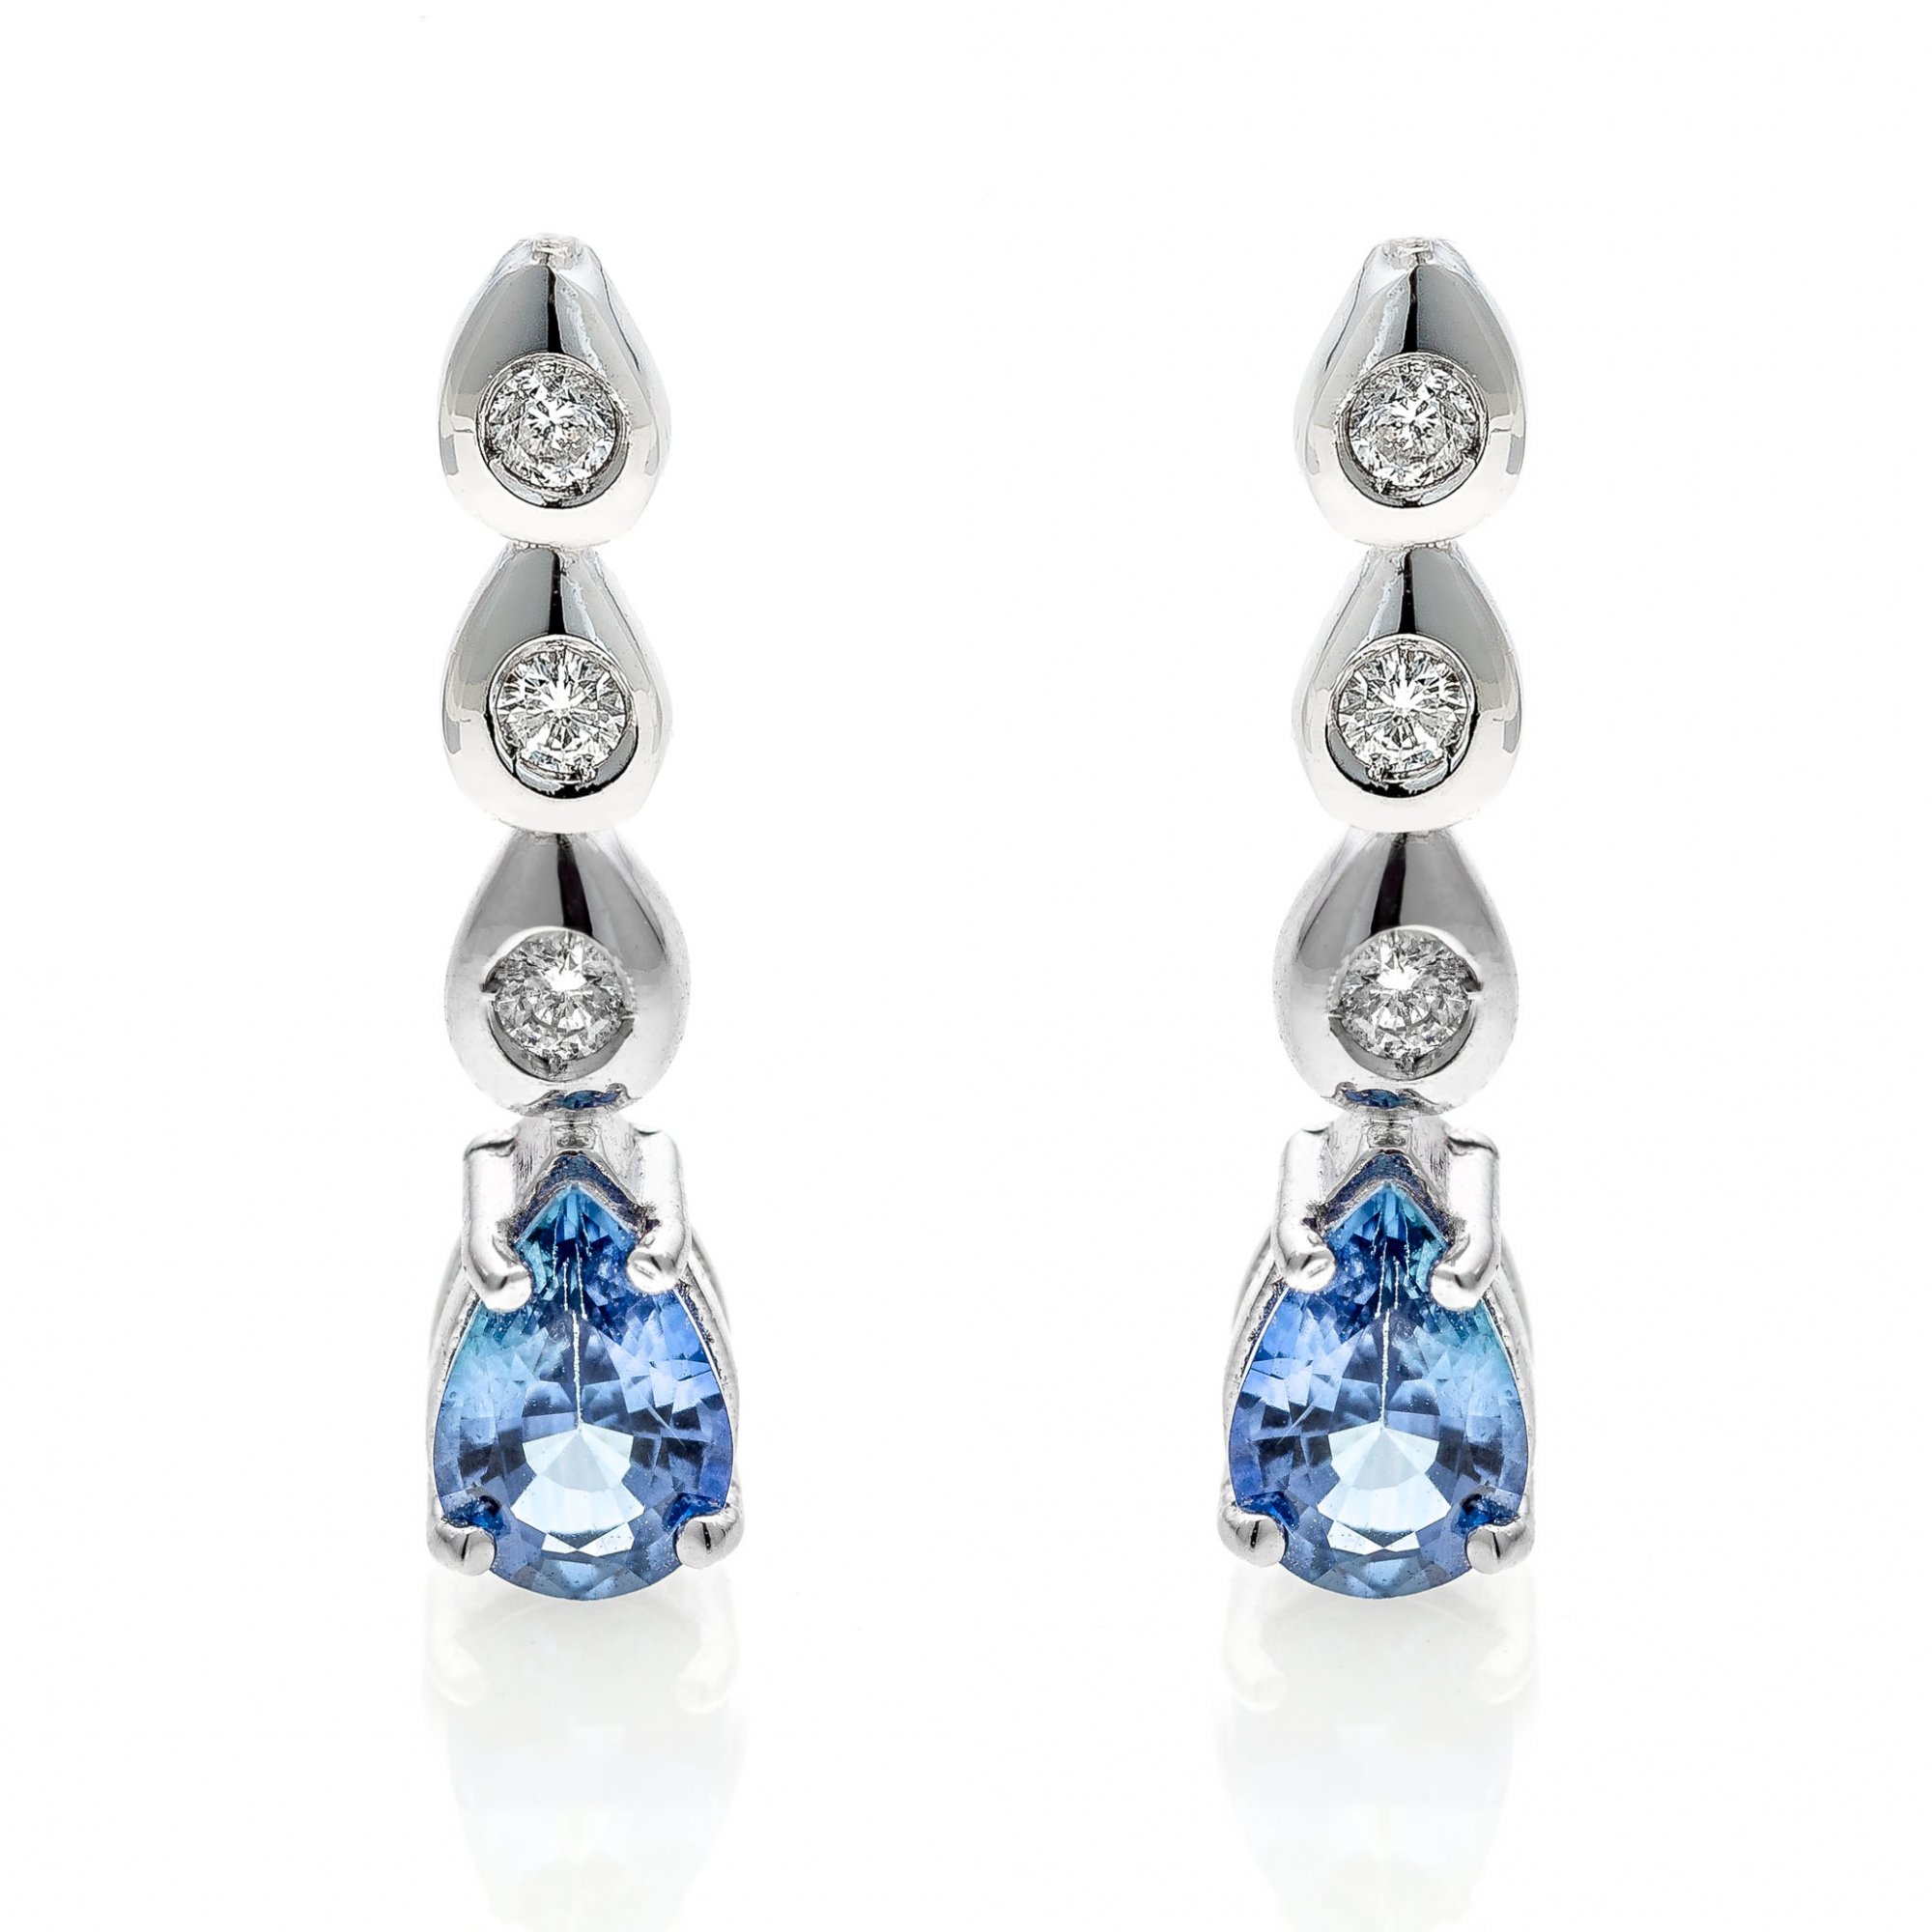 18 KT white gold earrings with sapphires and natural round brilliant cut diamonds